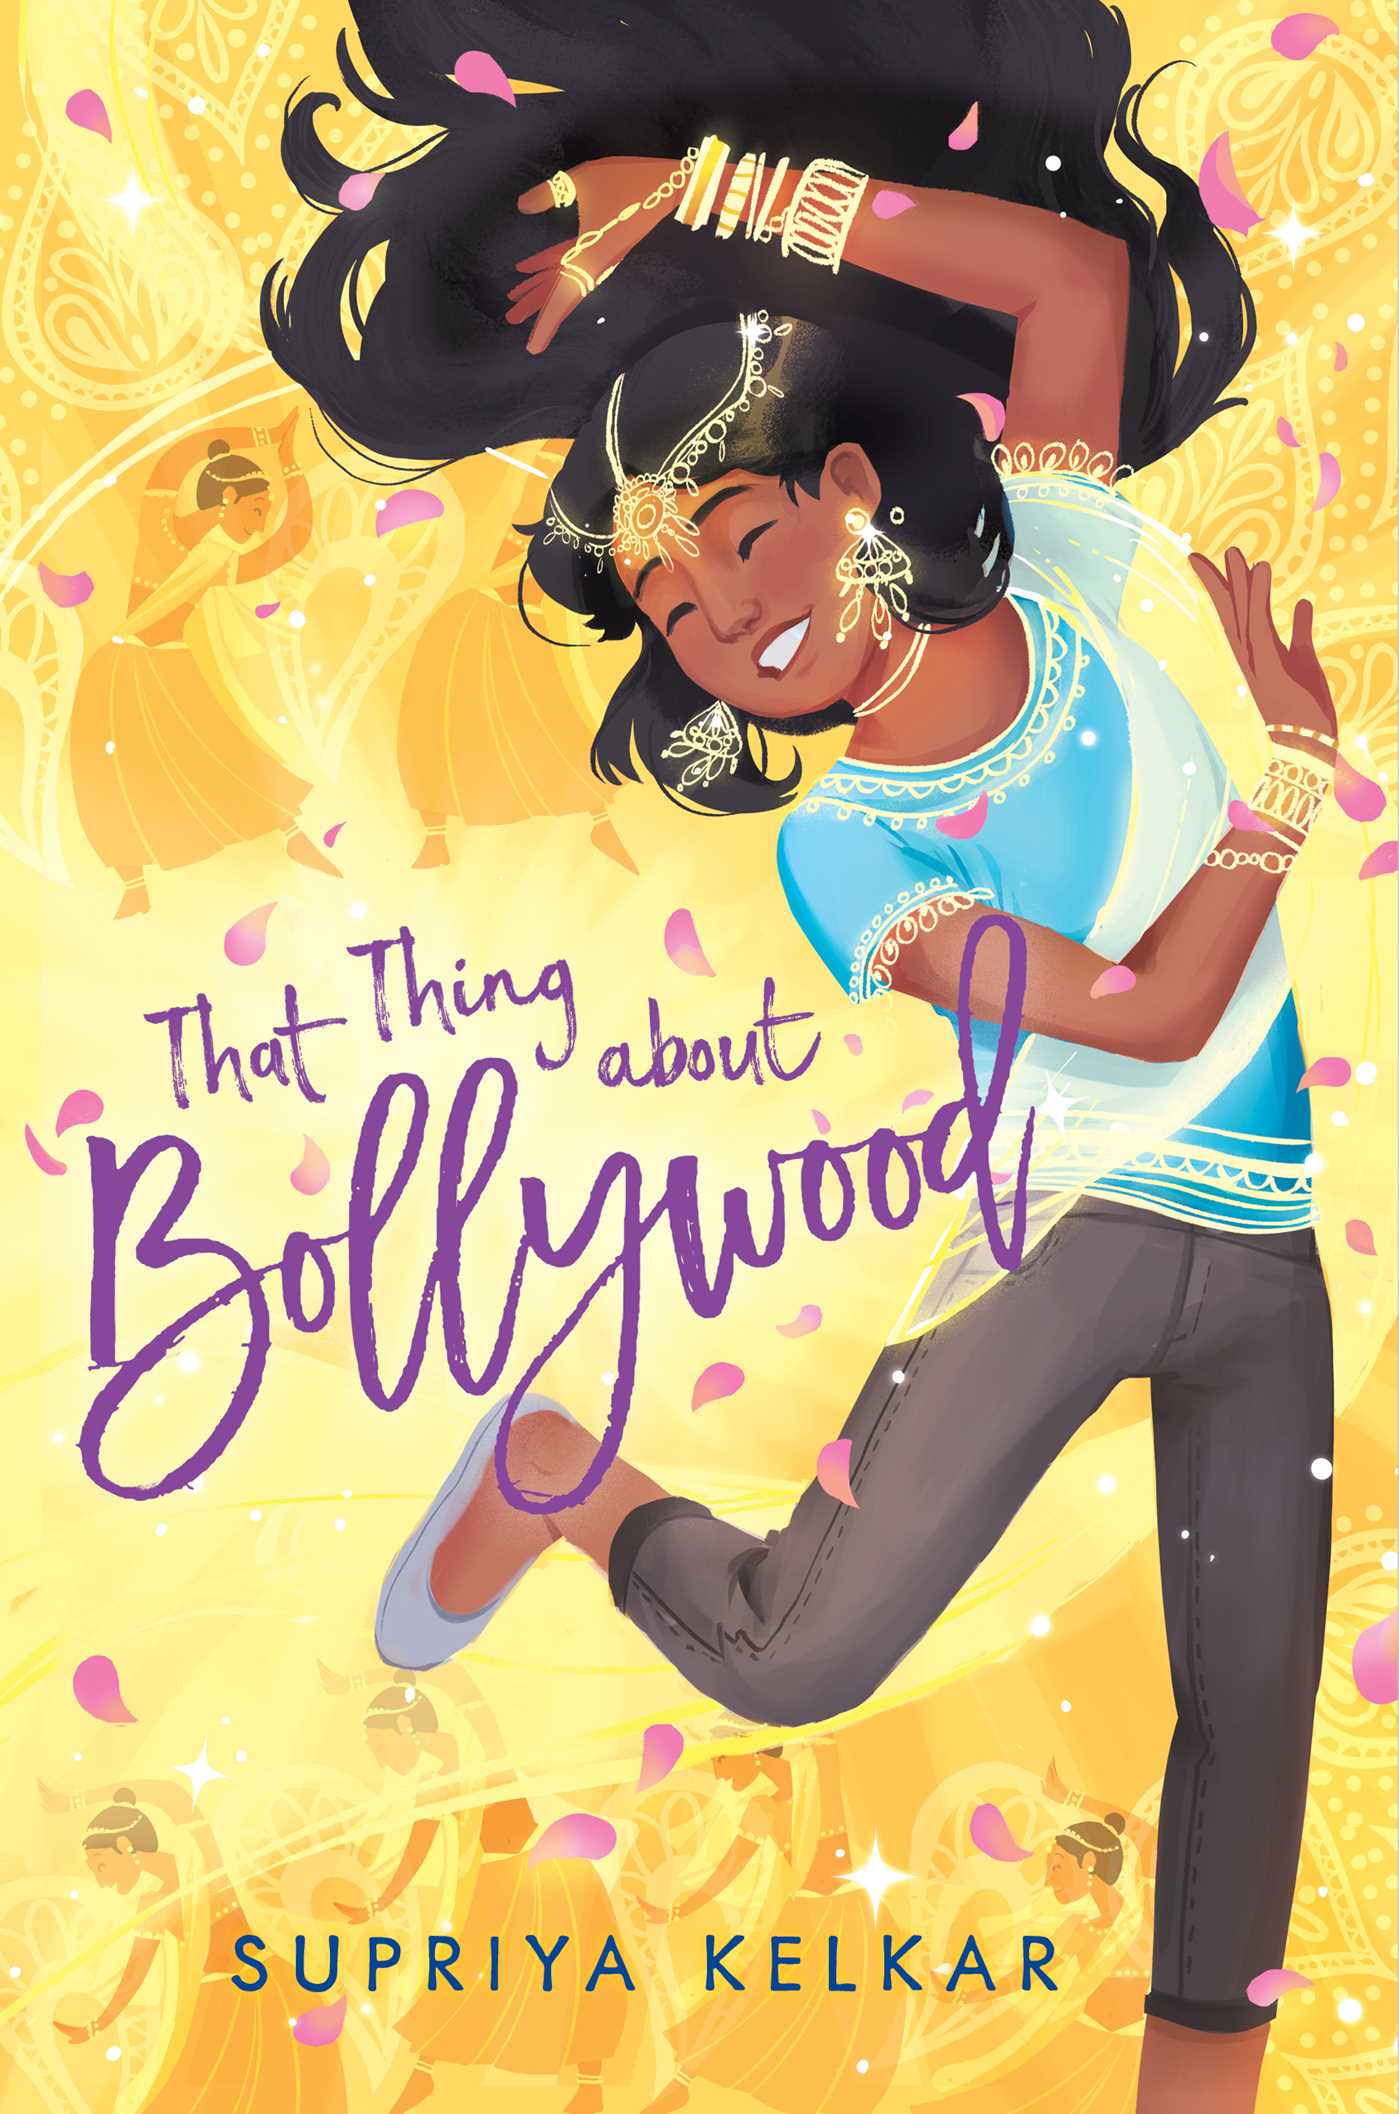 Image for "That Thing about Bollywood"